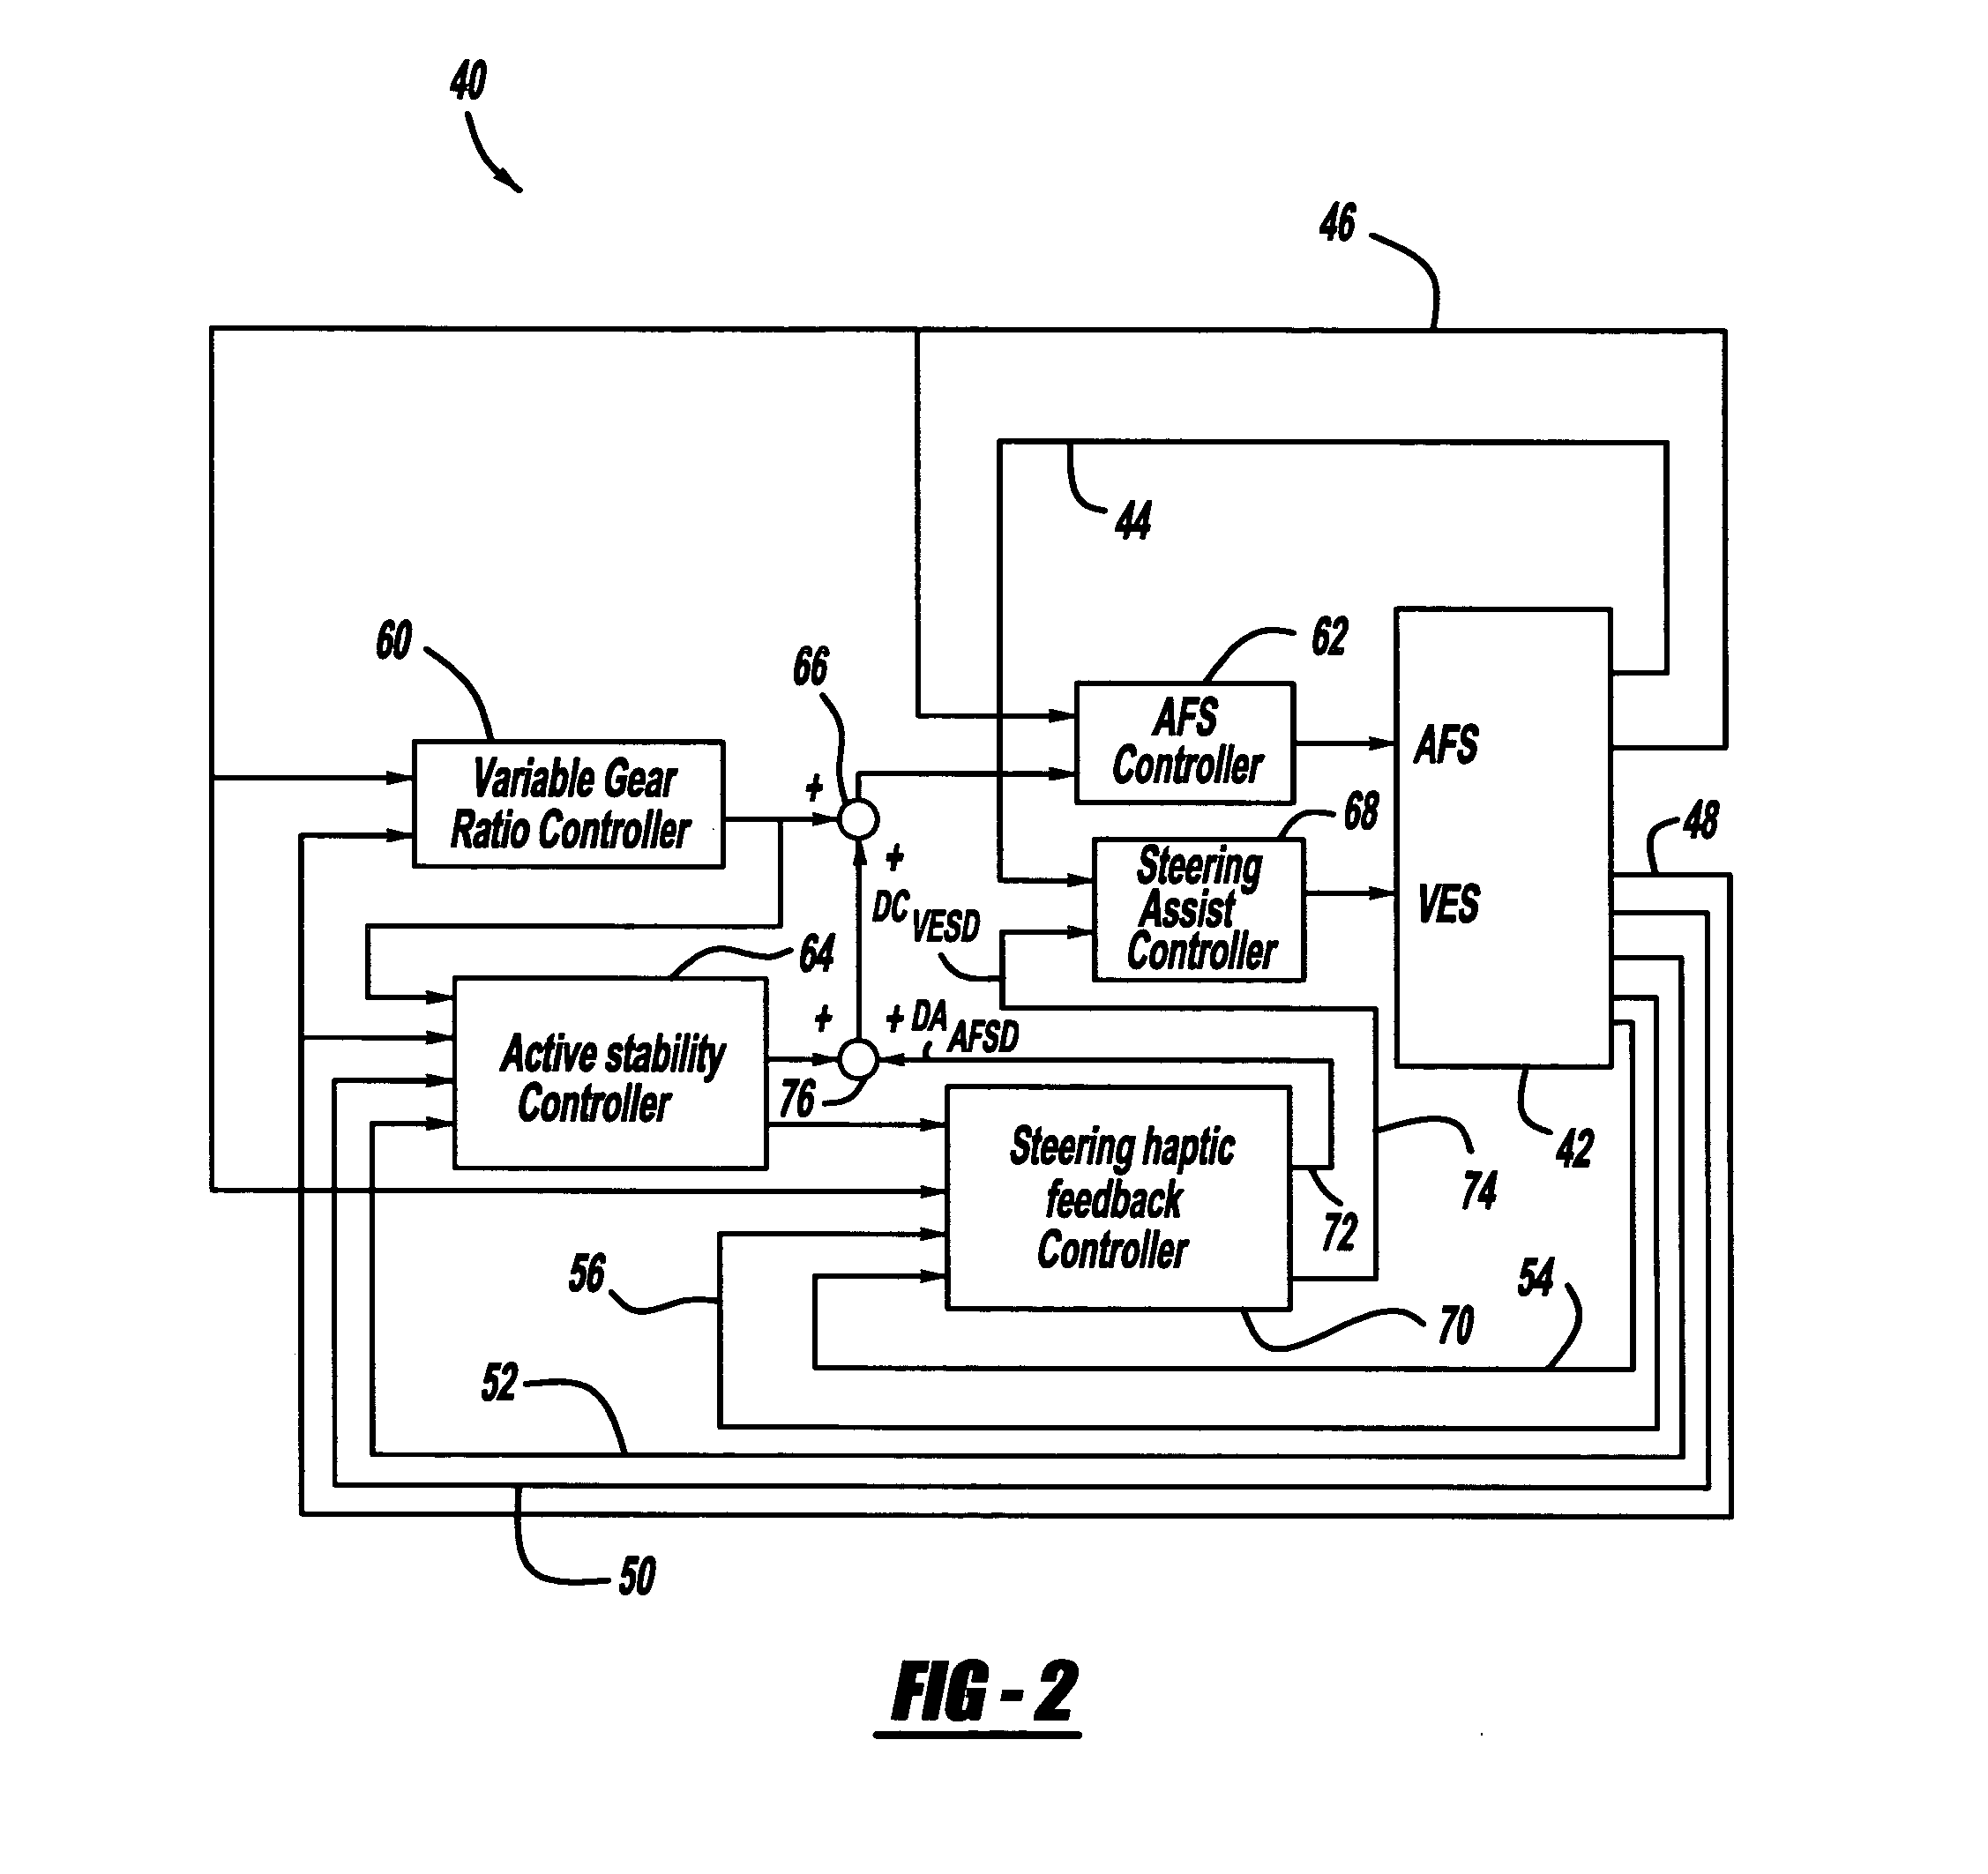 Steering haptic feedback system for vehicle active safety